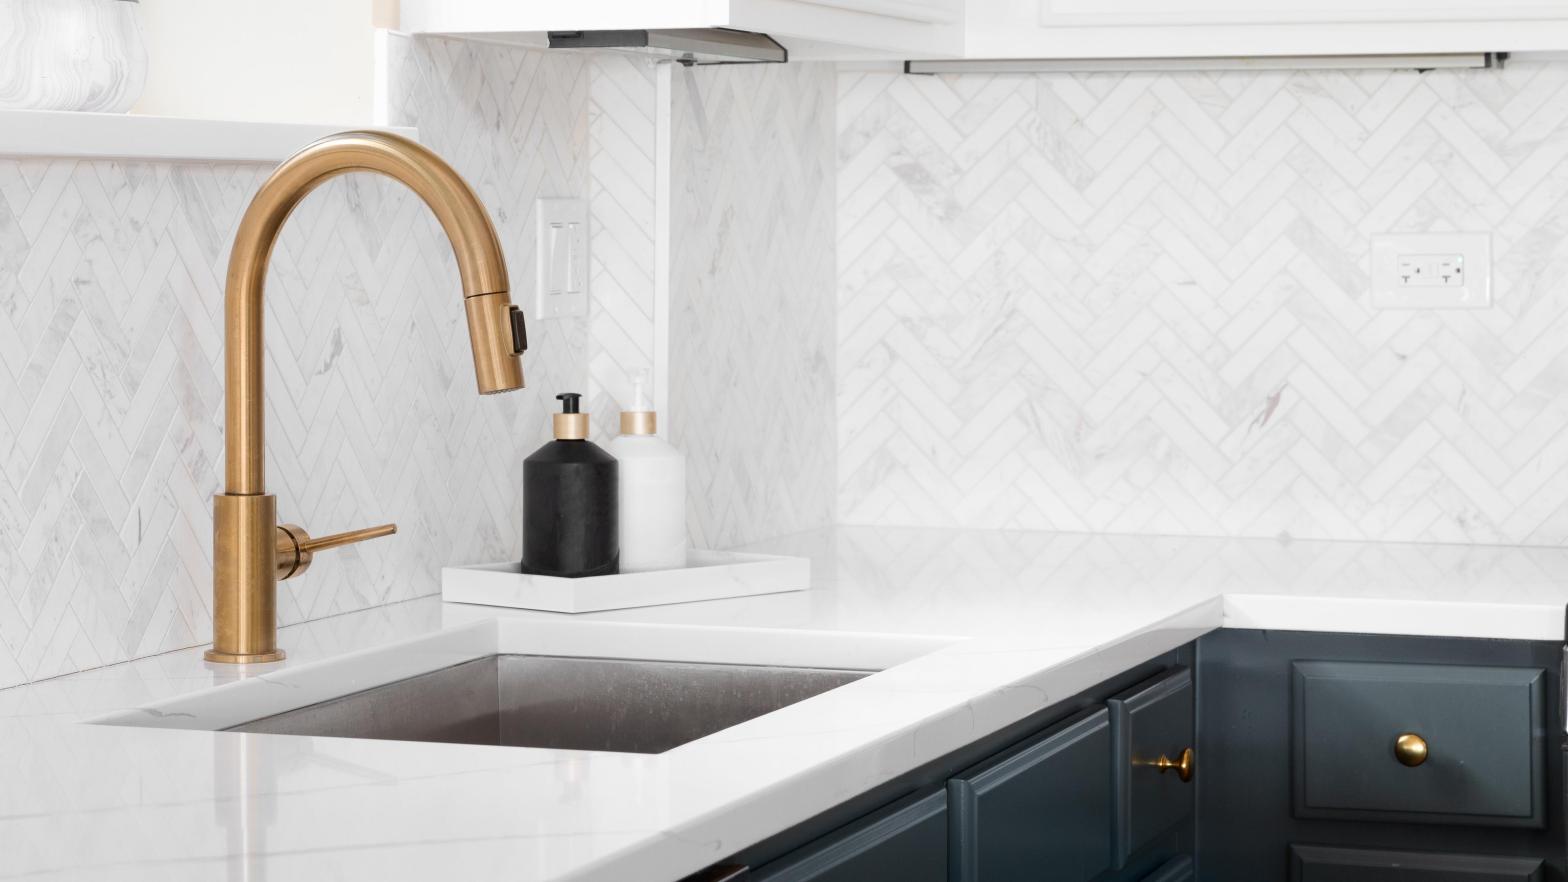 Update your kitchen's style with new fixtures. (Photo: Hendrickson Photography, Shutterstock)